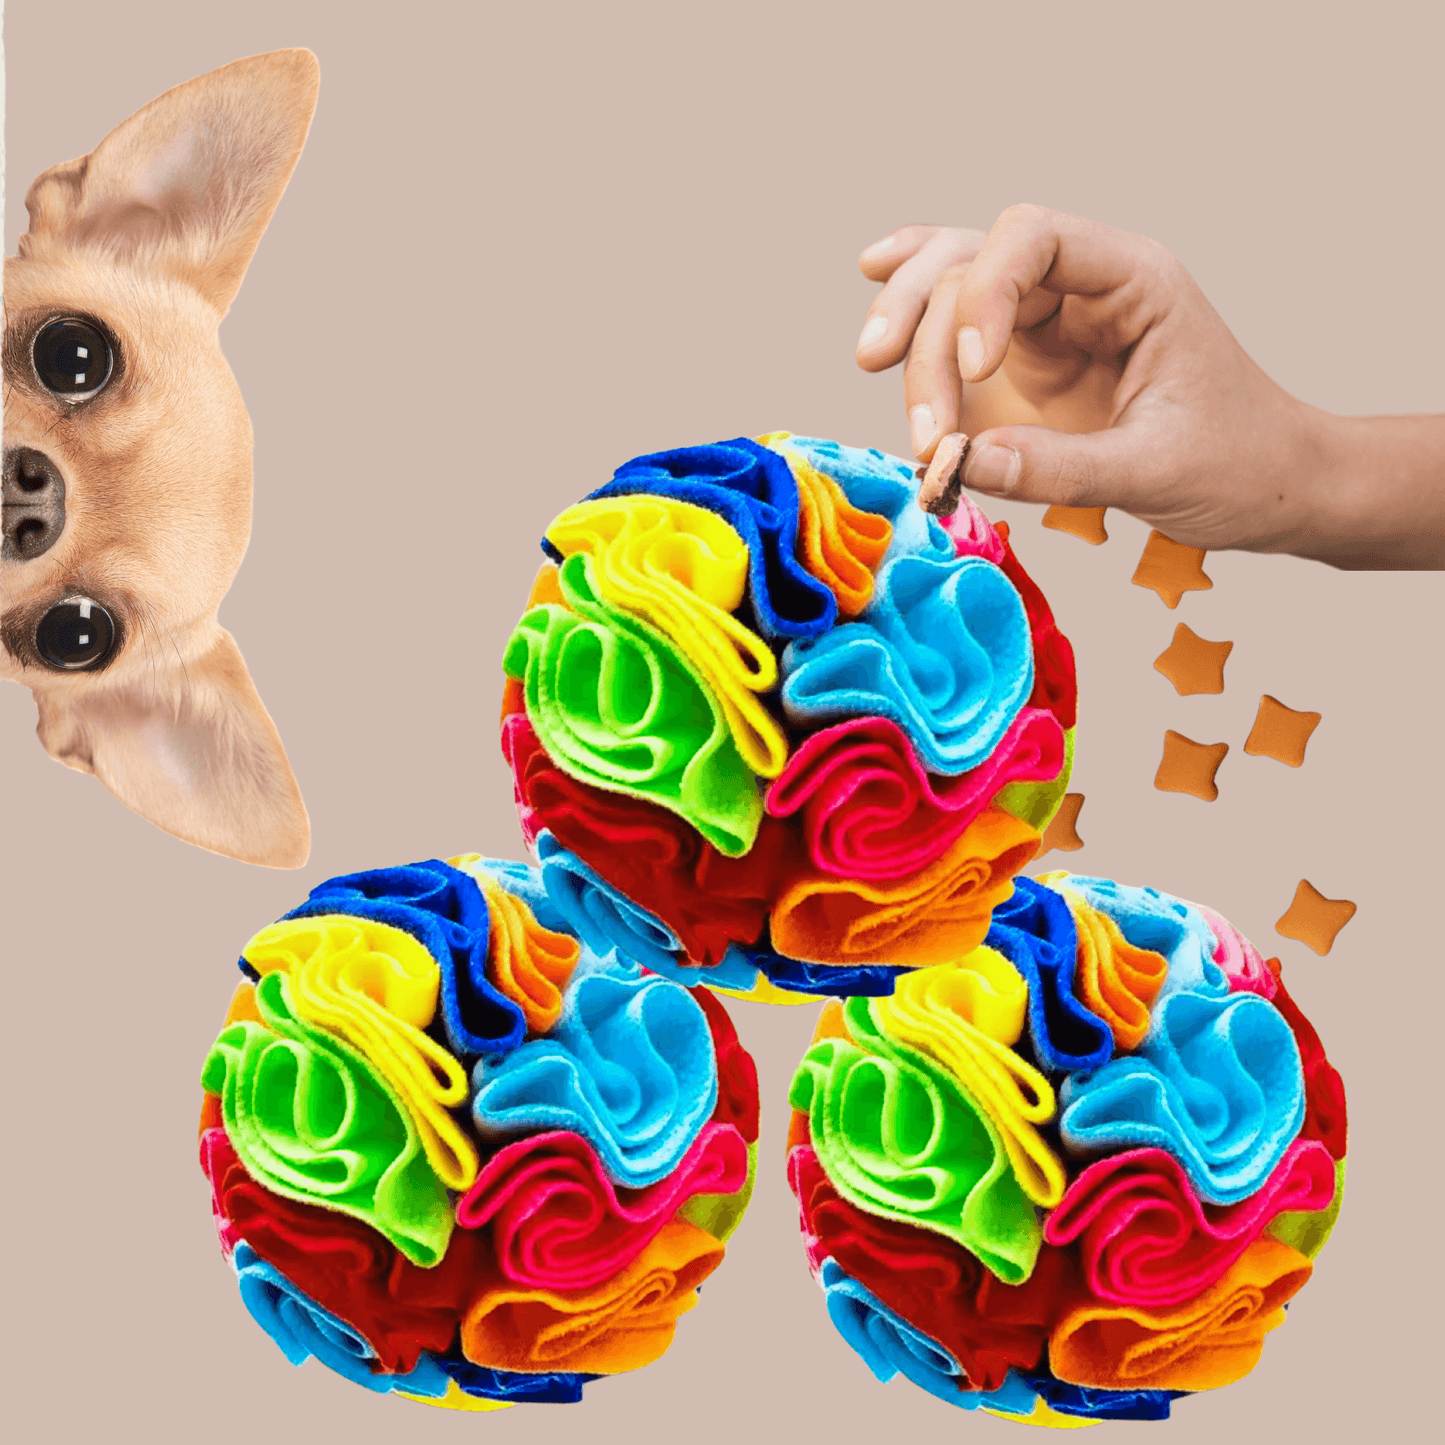 Snuffle Ball, Treat Dispenser, Treat Ball, Canine Enrichment, Keep Dogs  Busy, Dog Toy, Cat Toy, Toy, Busy Dog, Treat Holder, Hide Treats 